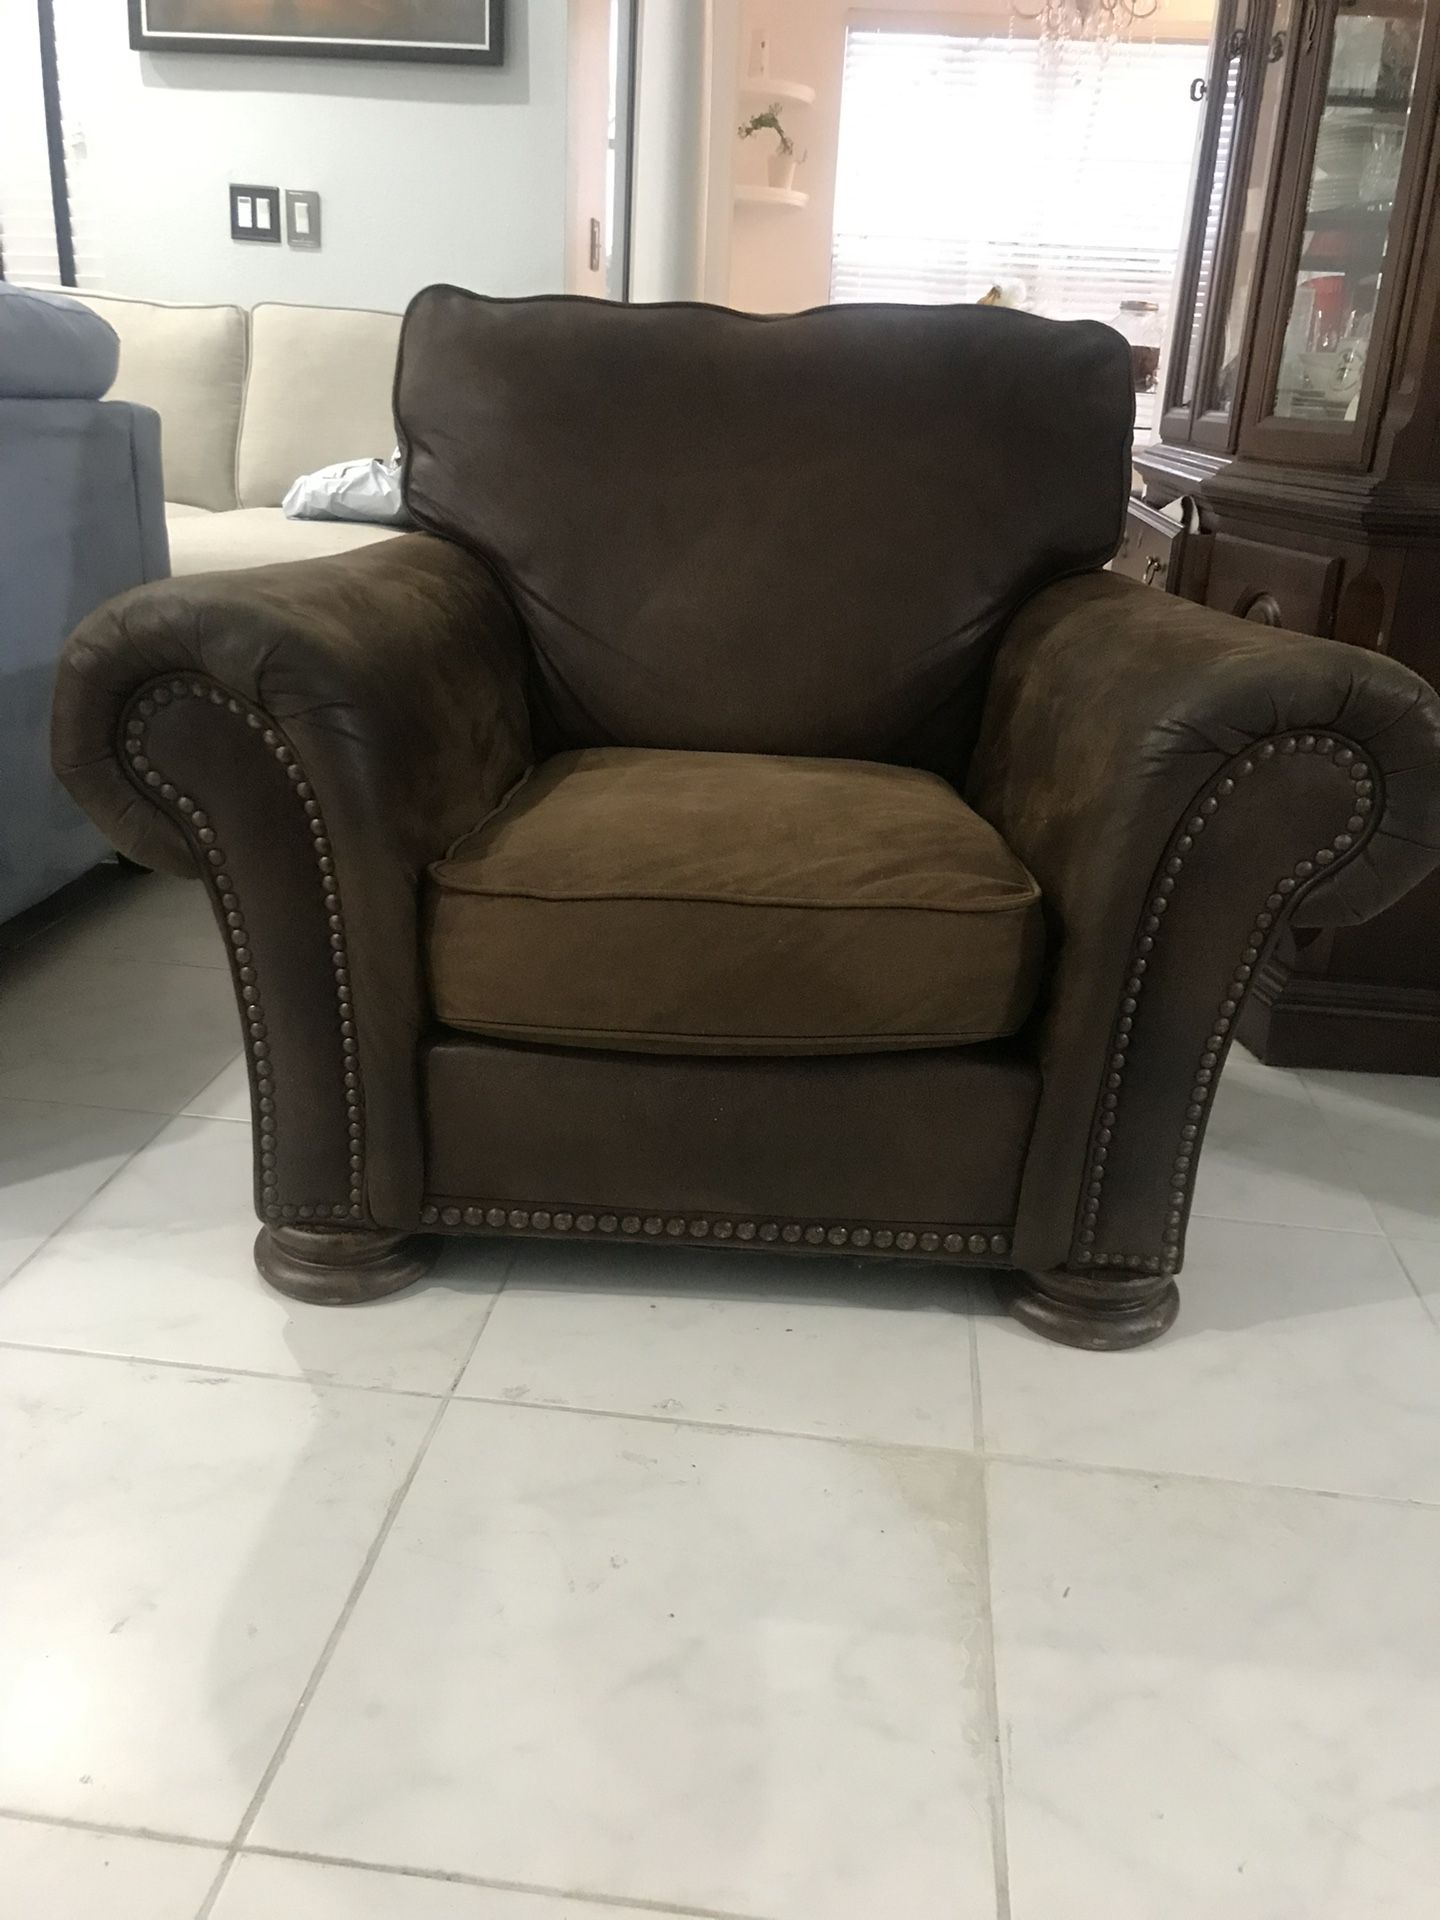 Cozy Brown Suede armchair In Great Condition FREE Local Delivery 🚚 